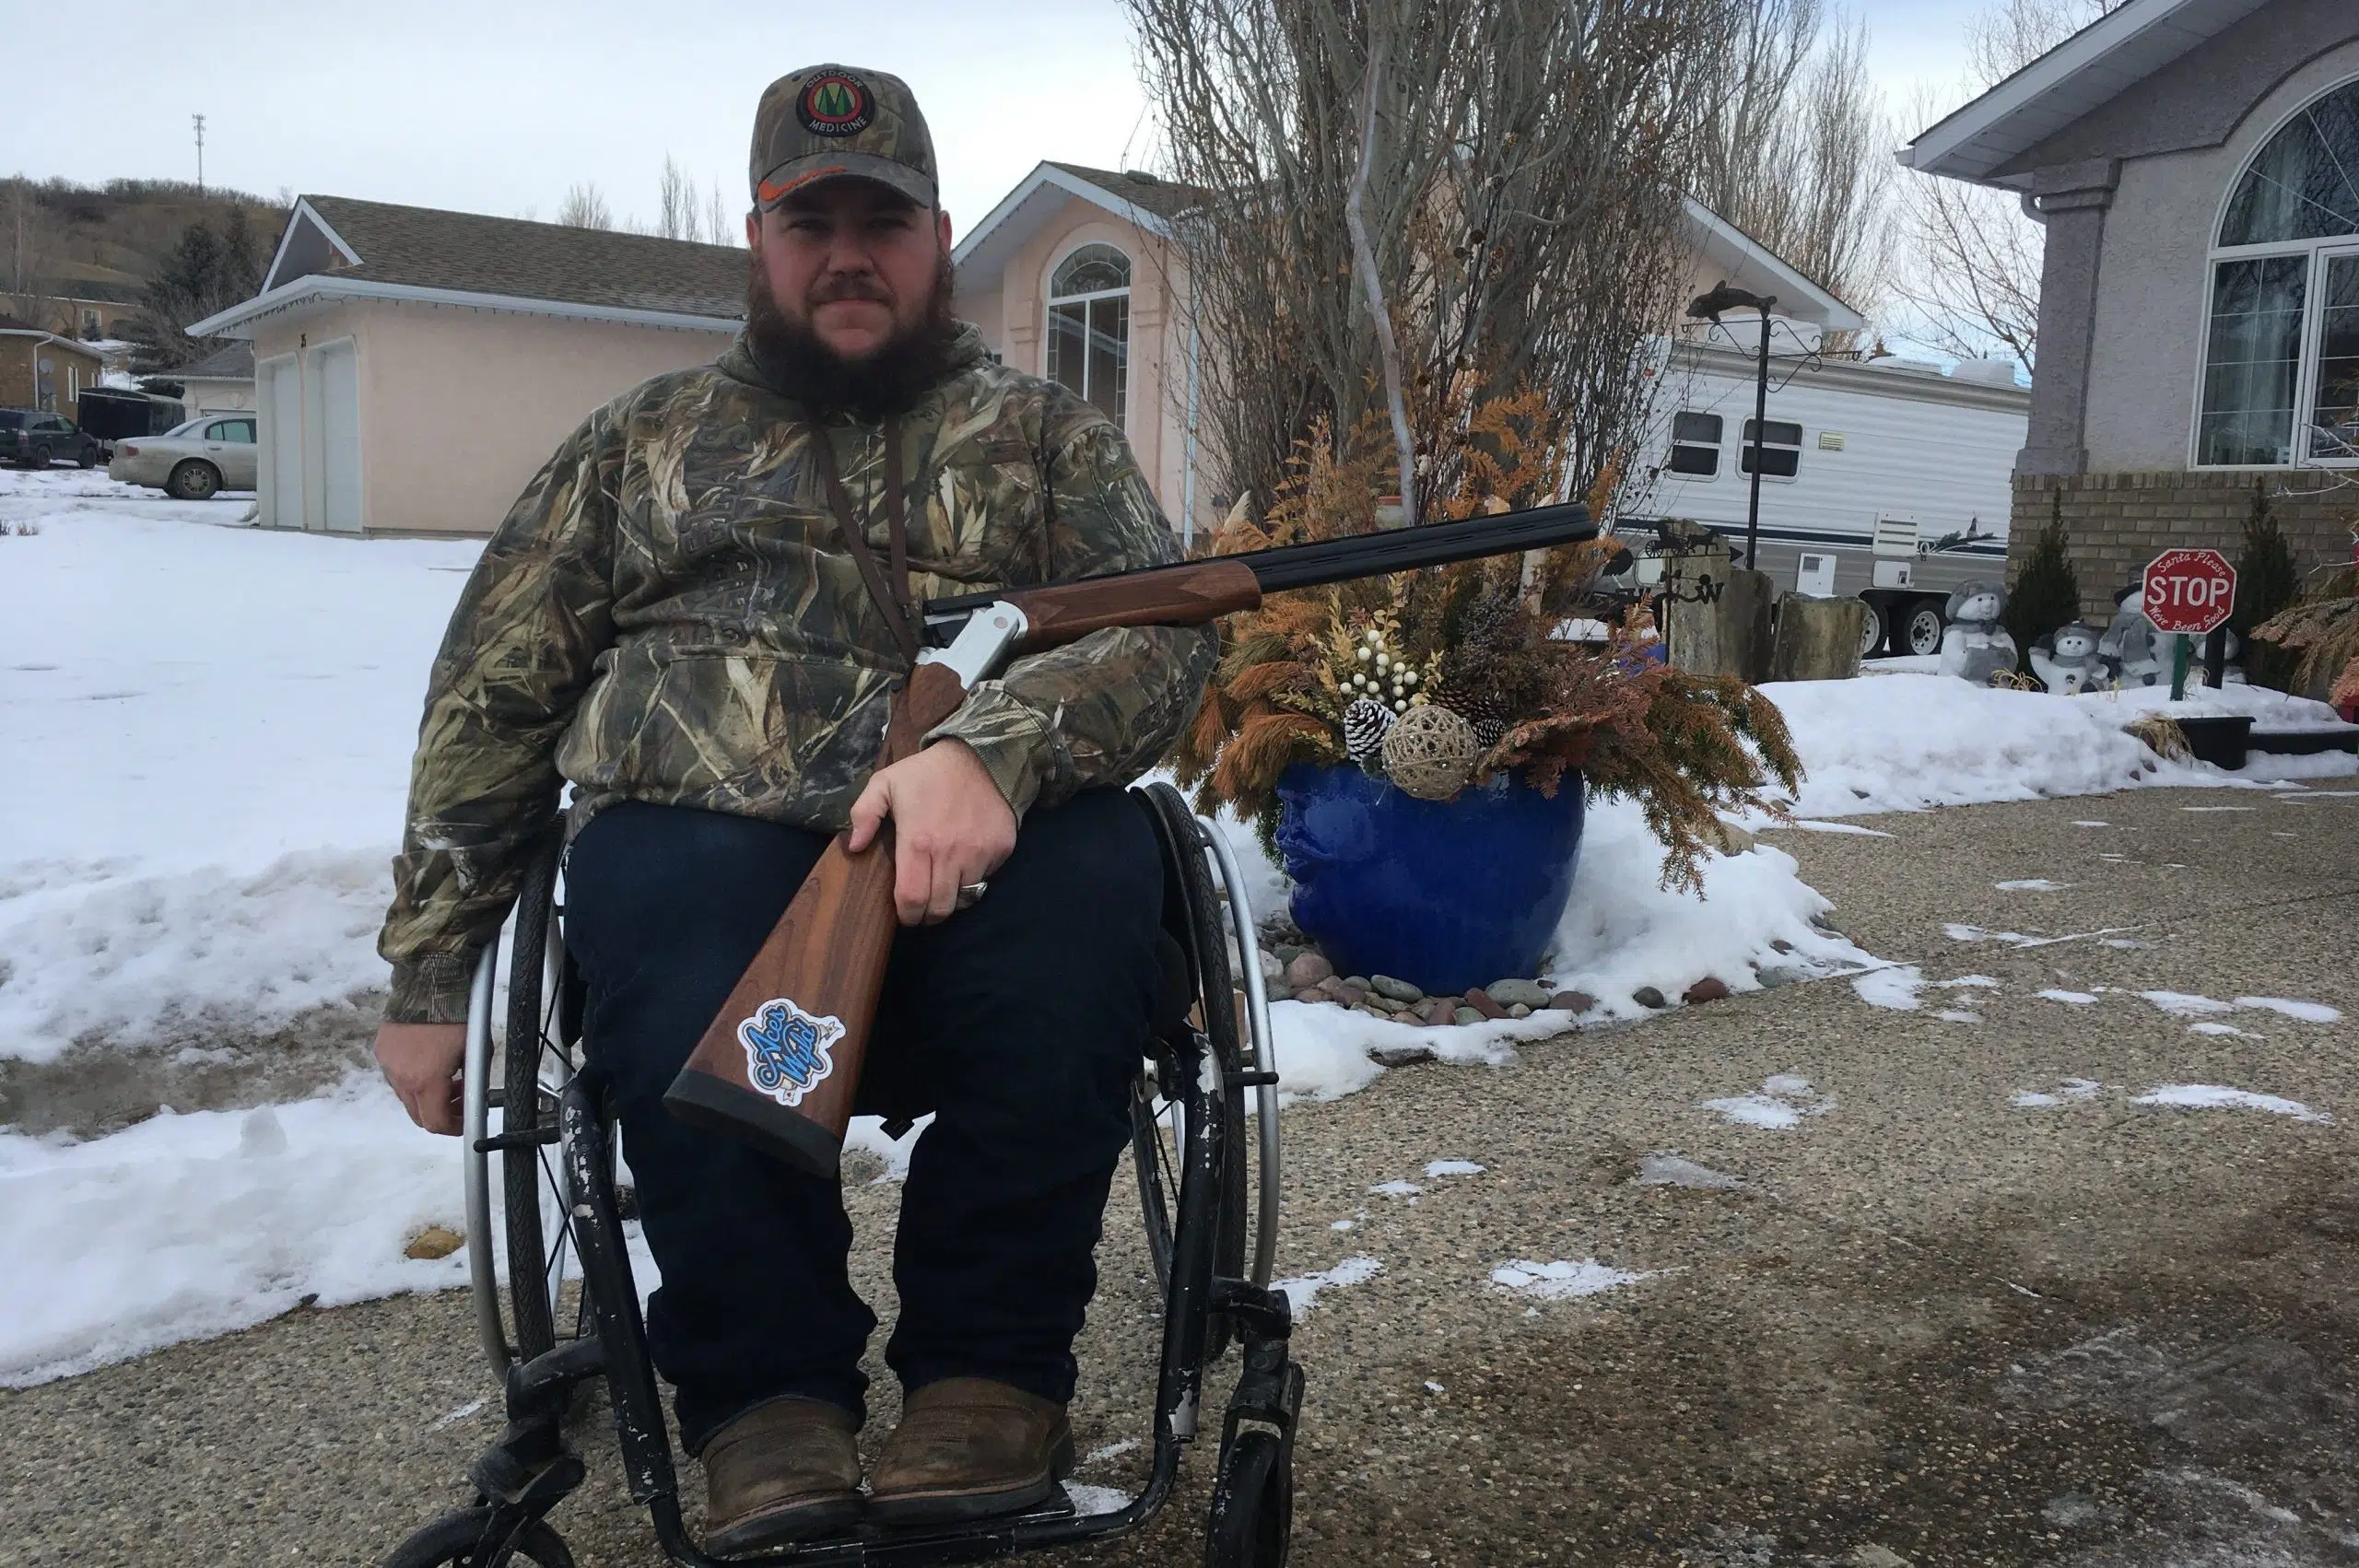 Disabled hunter pushing for more accessible hunting rules